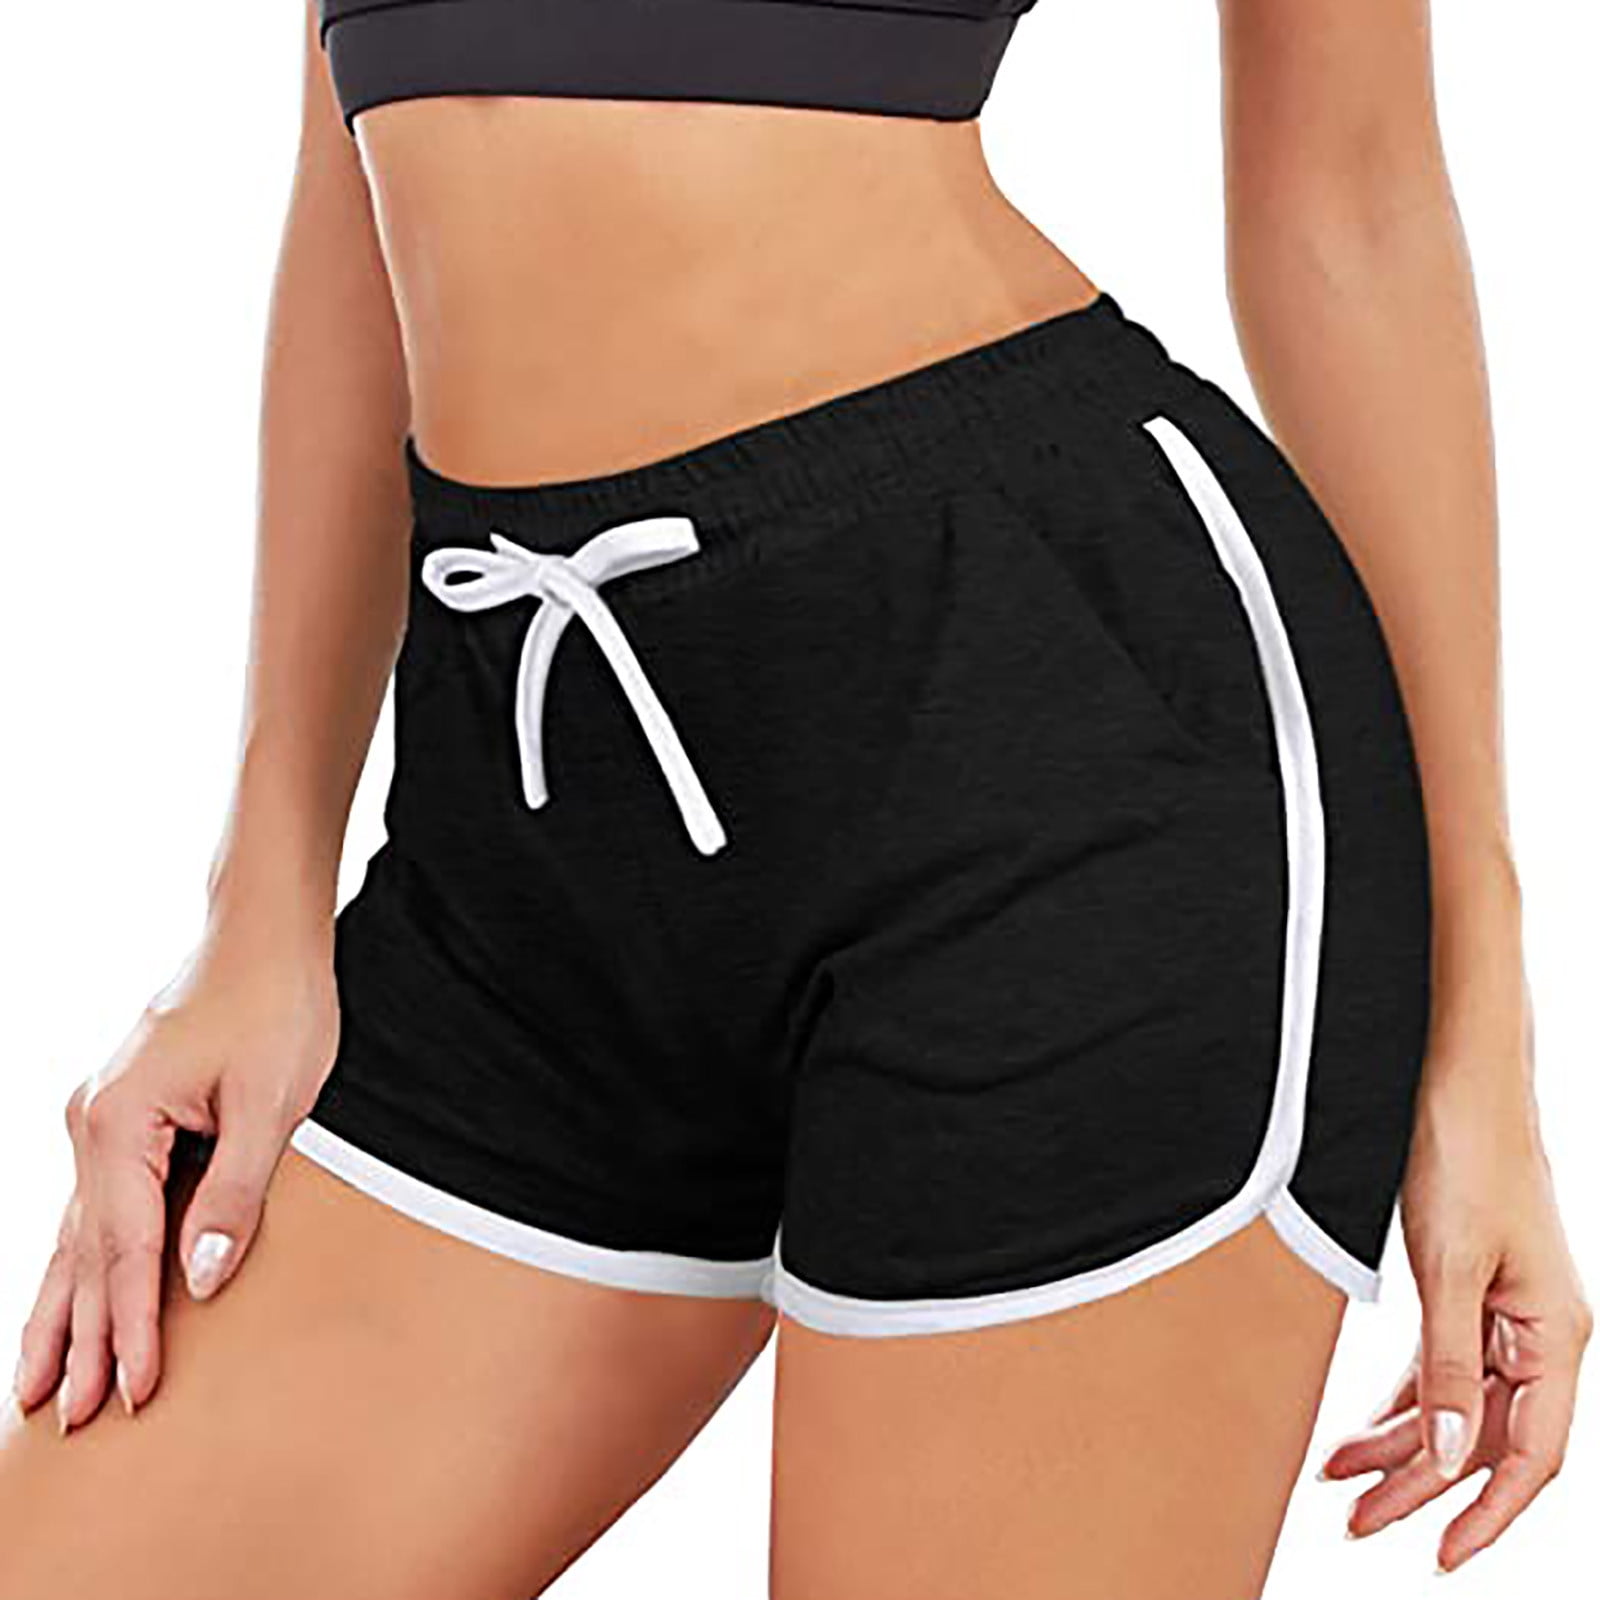 Buy HKJIEVSHOP 2 Pack Athletic Shorts for Women Quick Dry Running Shorts  with Pockets Workout Shorts for Gym Sports Casual Summer, Black & Purple,  Medium at